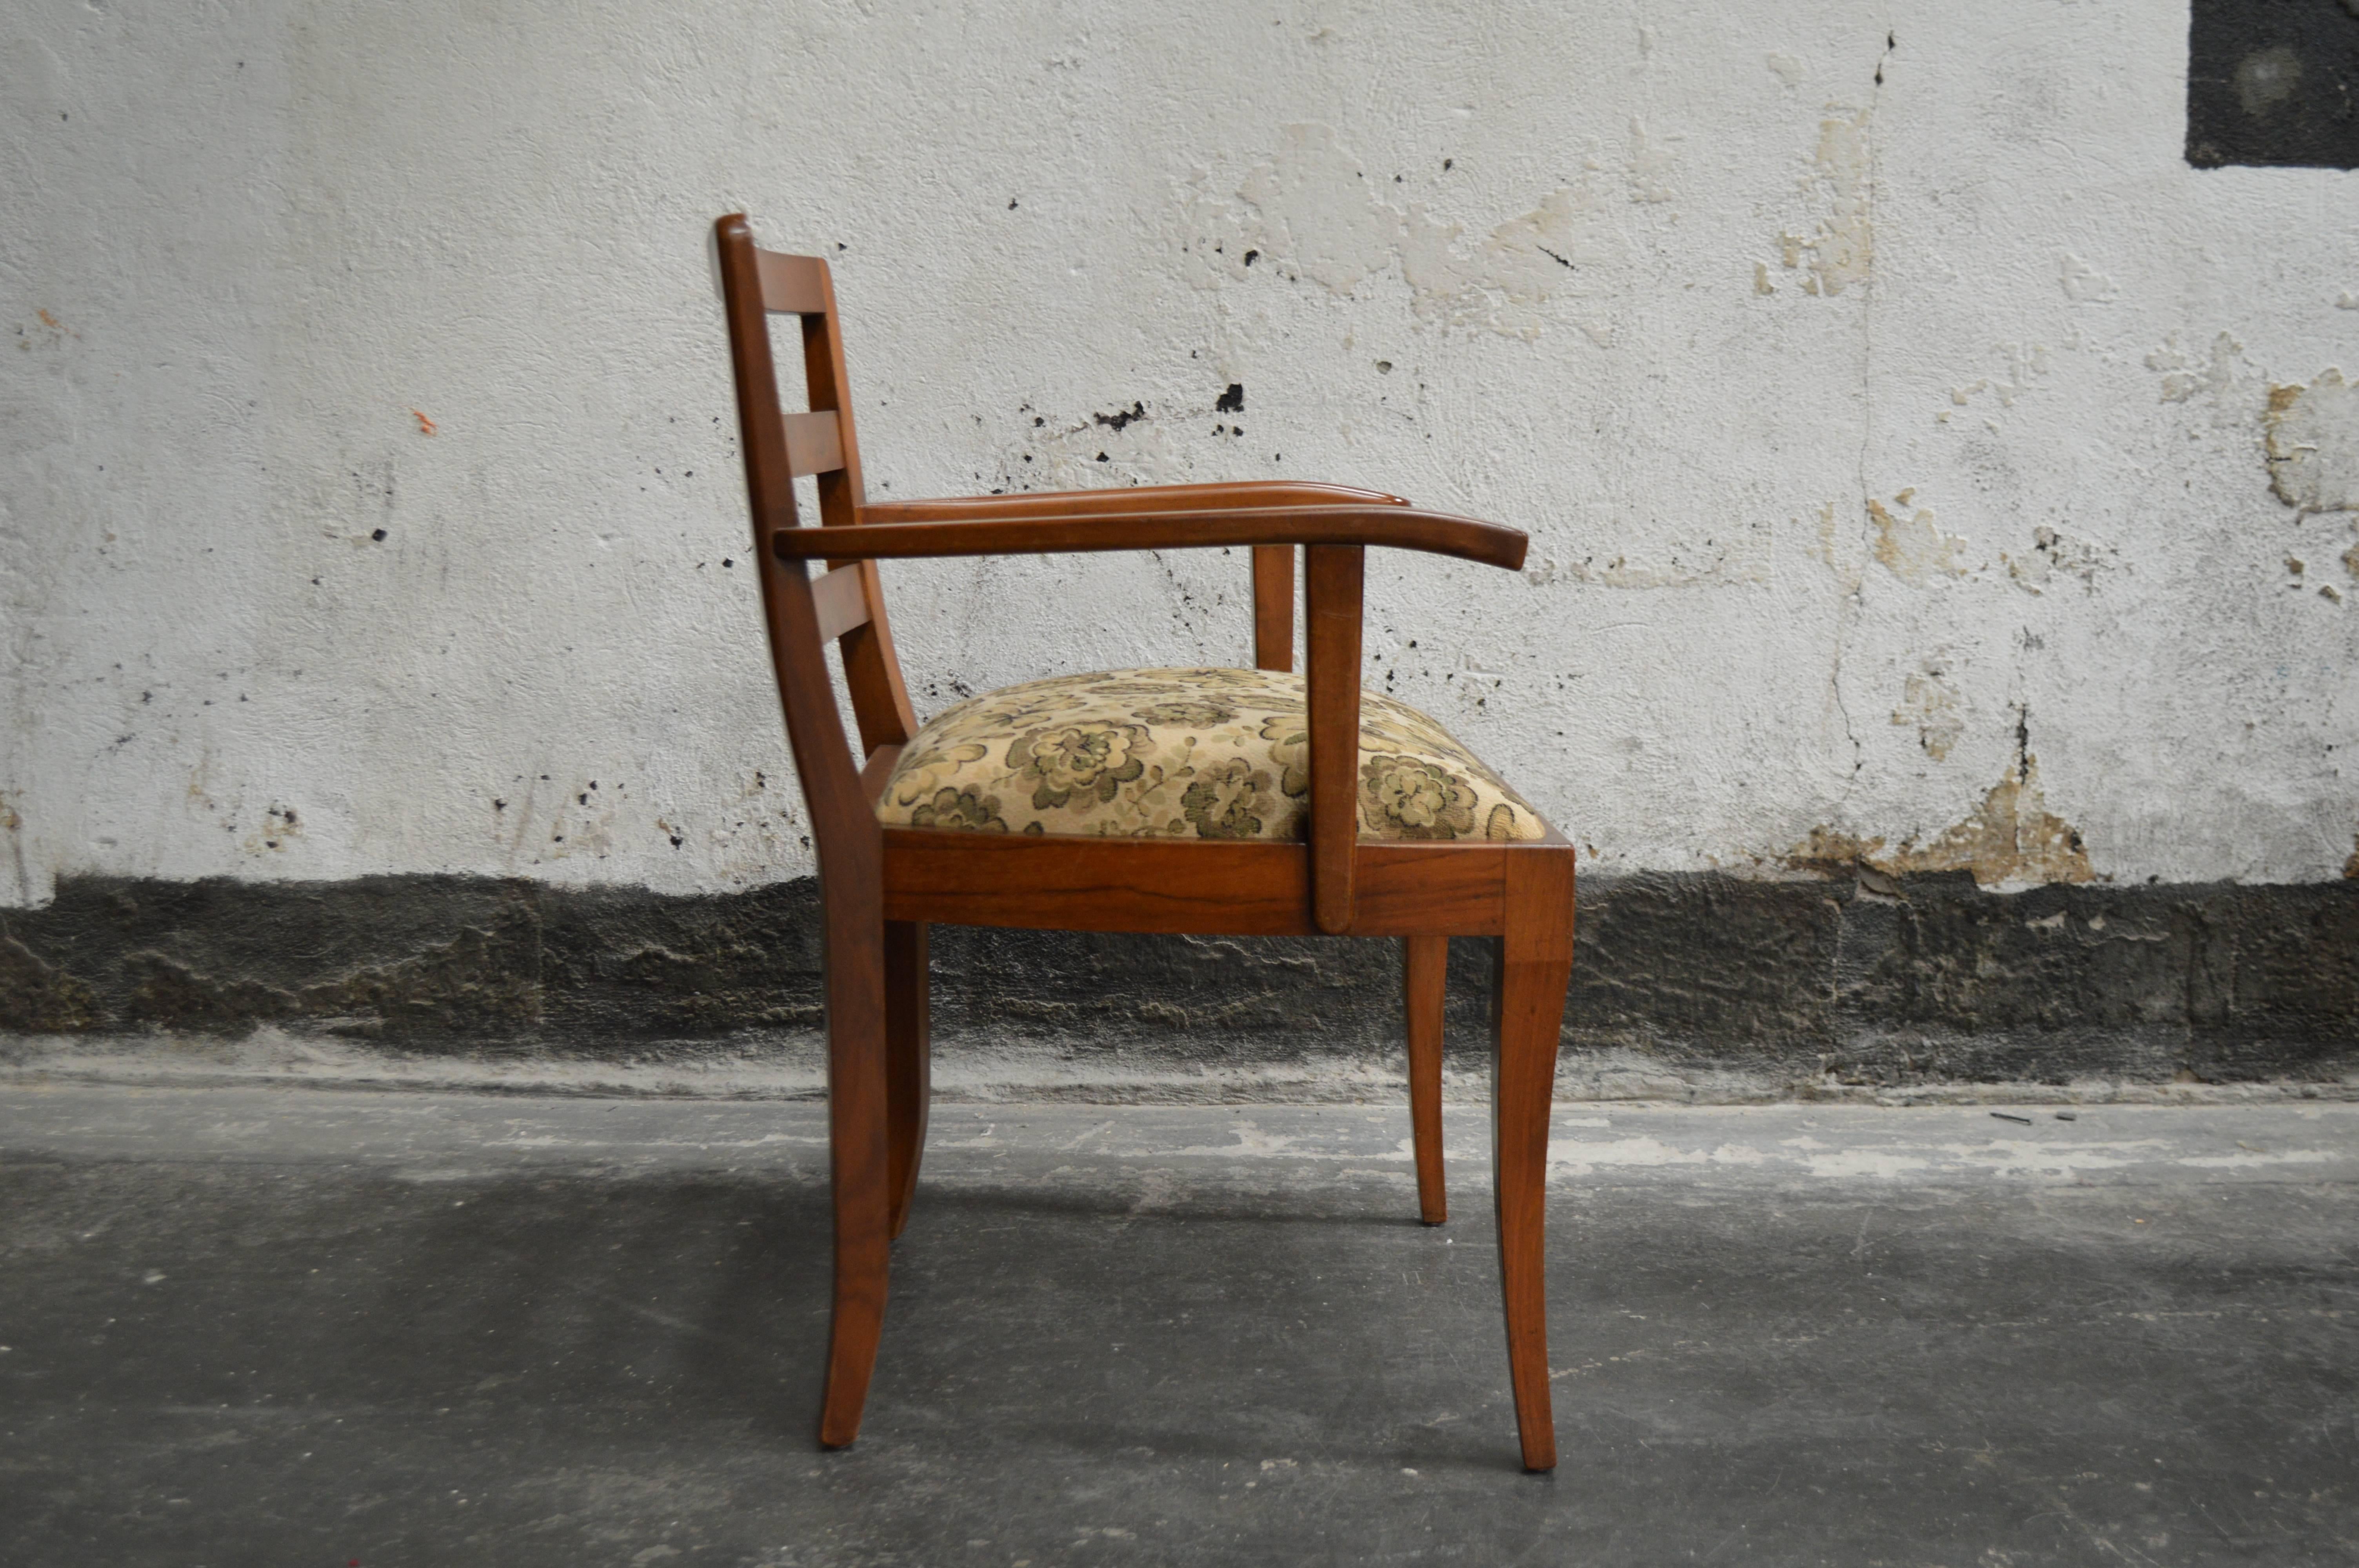 Swedish Art Moderne side accent armchair made of golden flame birch with original upholstery. Fabric is in excellent vintage condition but the price does include reupholstery in your COM fabric if preferred. 

Dimensions:
25.5